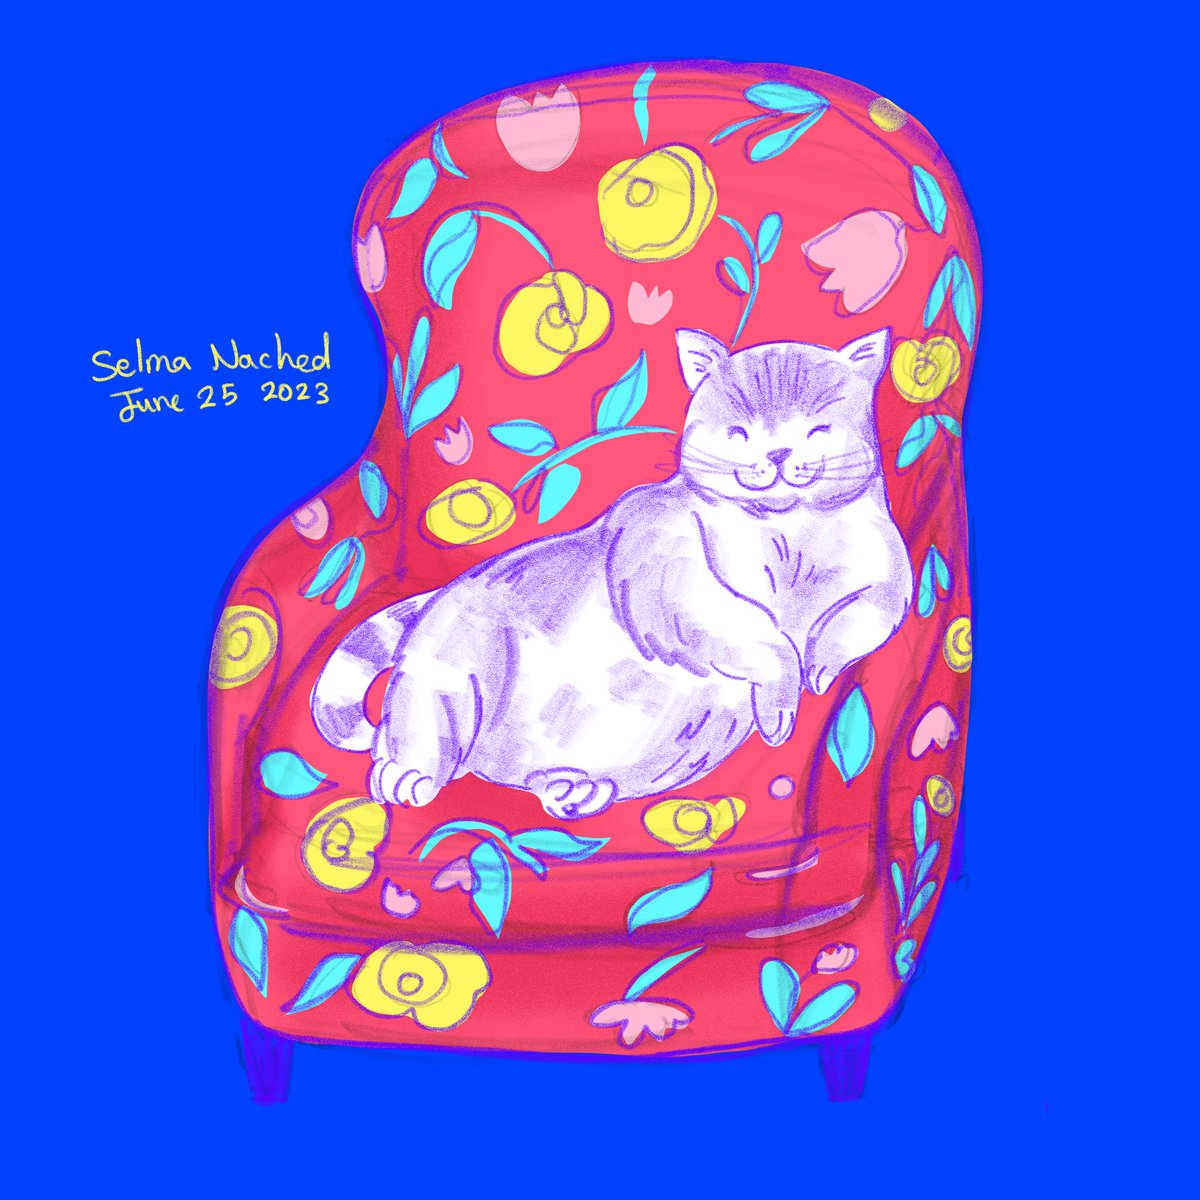 Just a cat living her best life 😺 
#illustrationartist #illustration #visualstoryteller #visualart #childrenbooksillustrator #fresco  #illustrationart  #colorscheme #colourscafe #colorcombination #colourscafe999 #colorpalette #cat #couch @AdobeDrawing